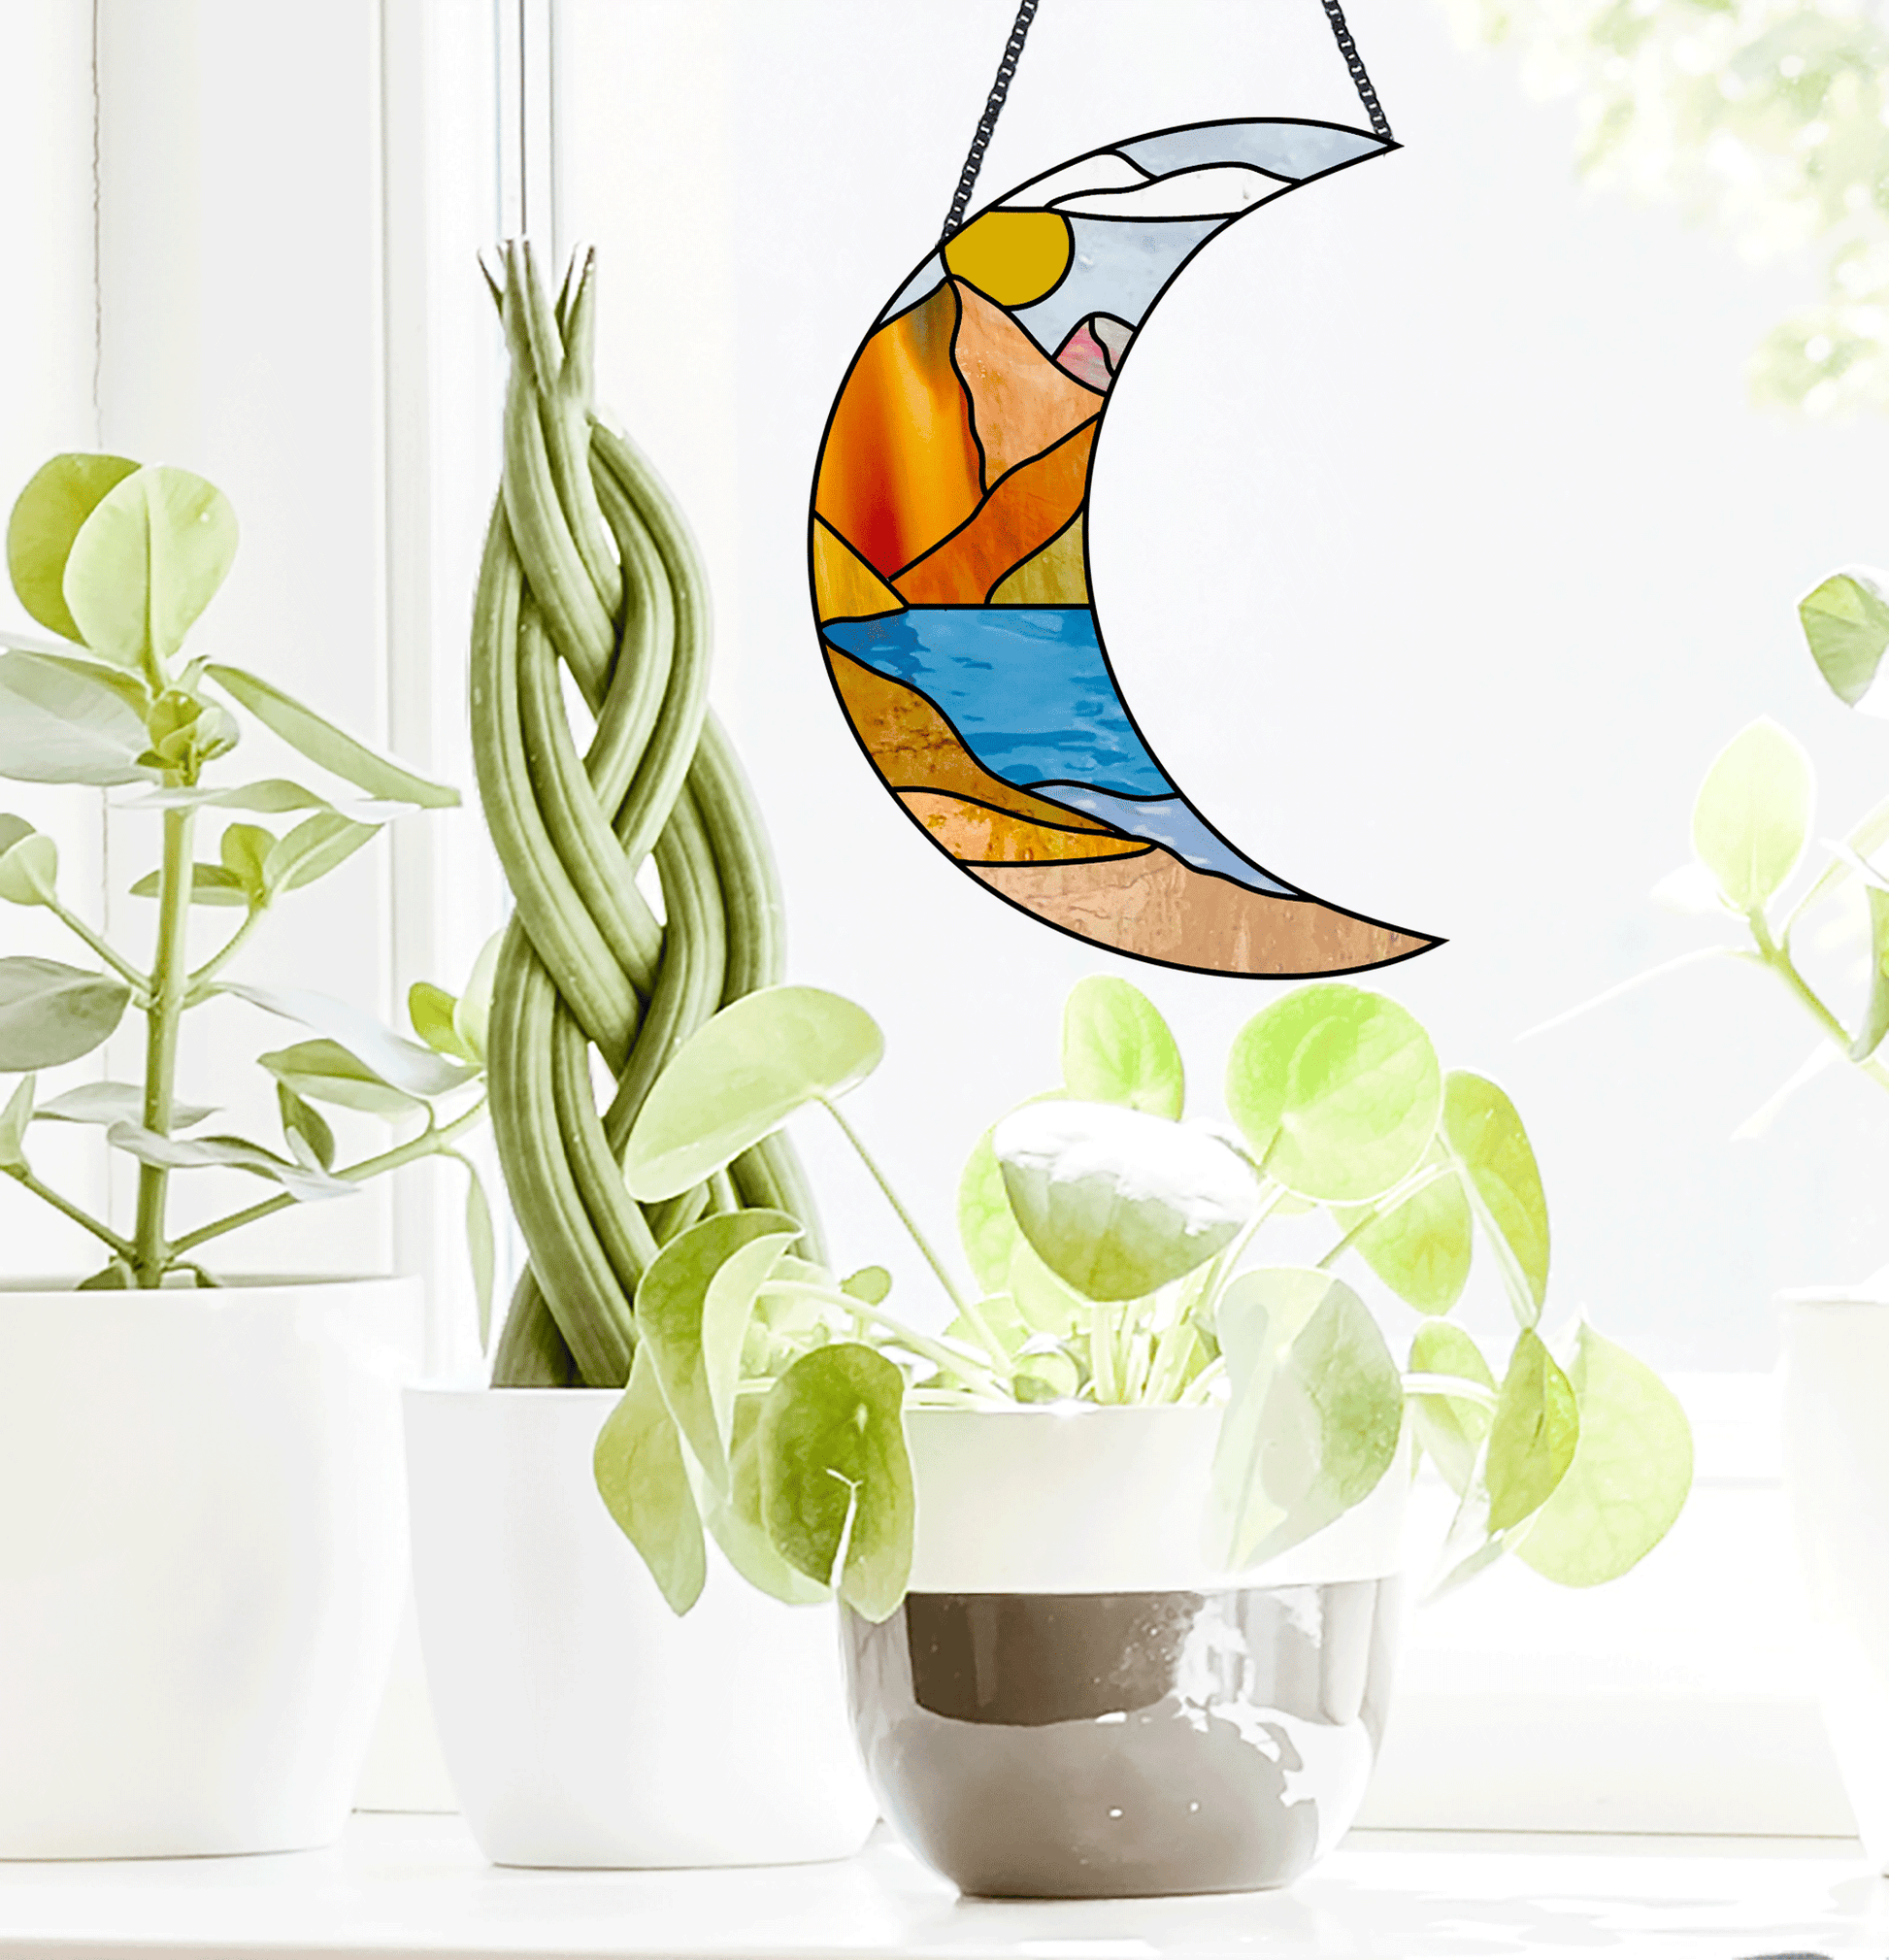 Stained glass pattern for a boho landscape crescent moon, instant PDF download, shown in a window with plants